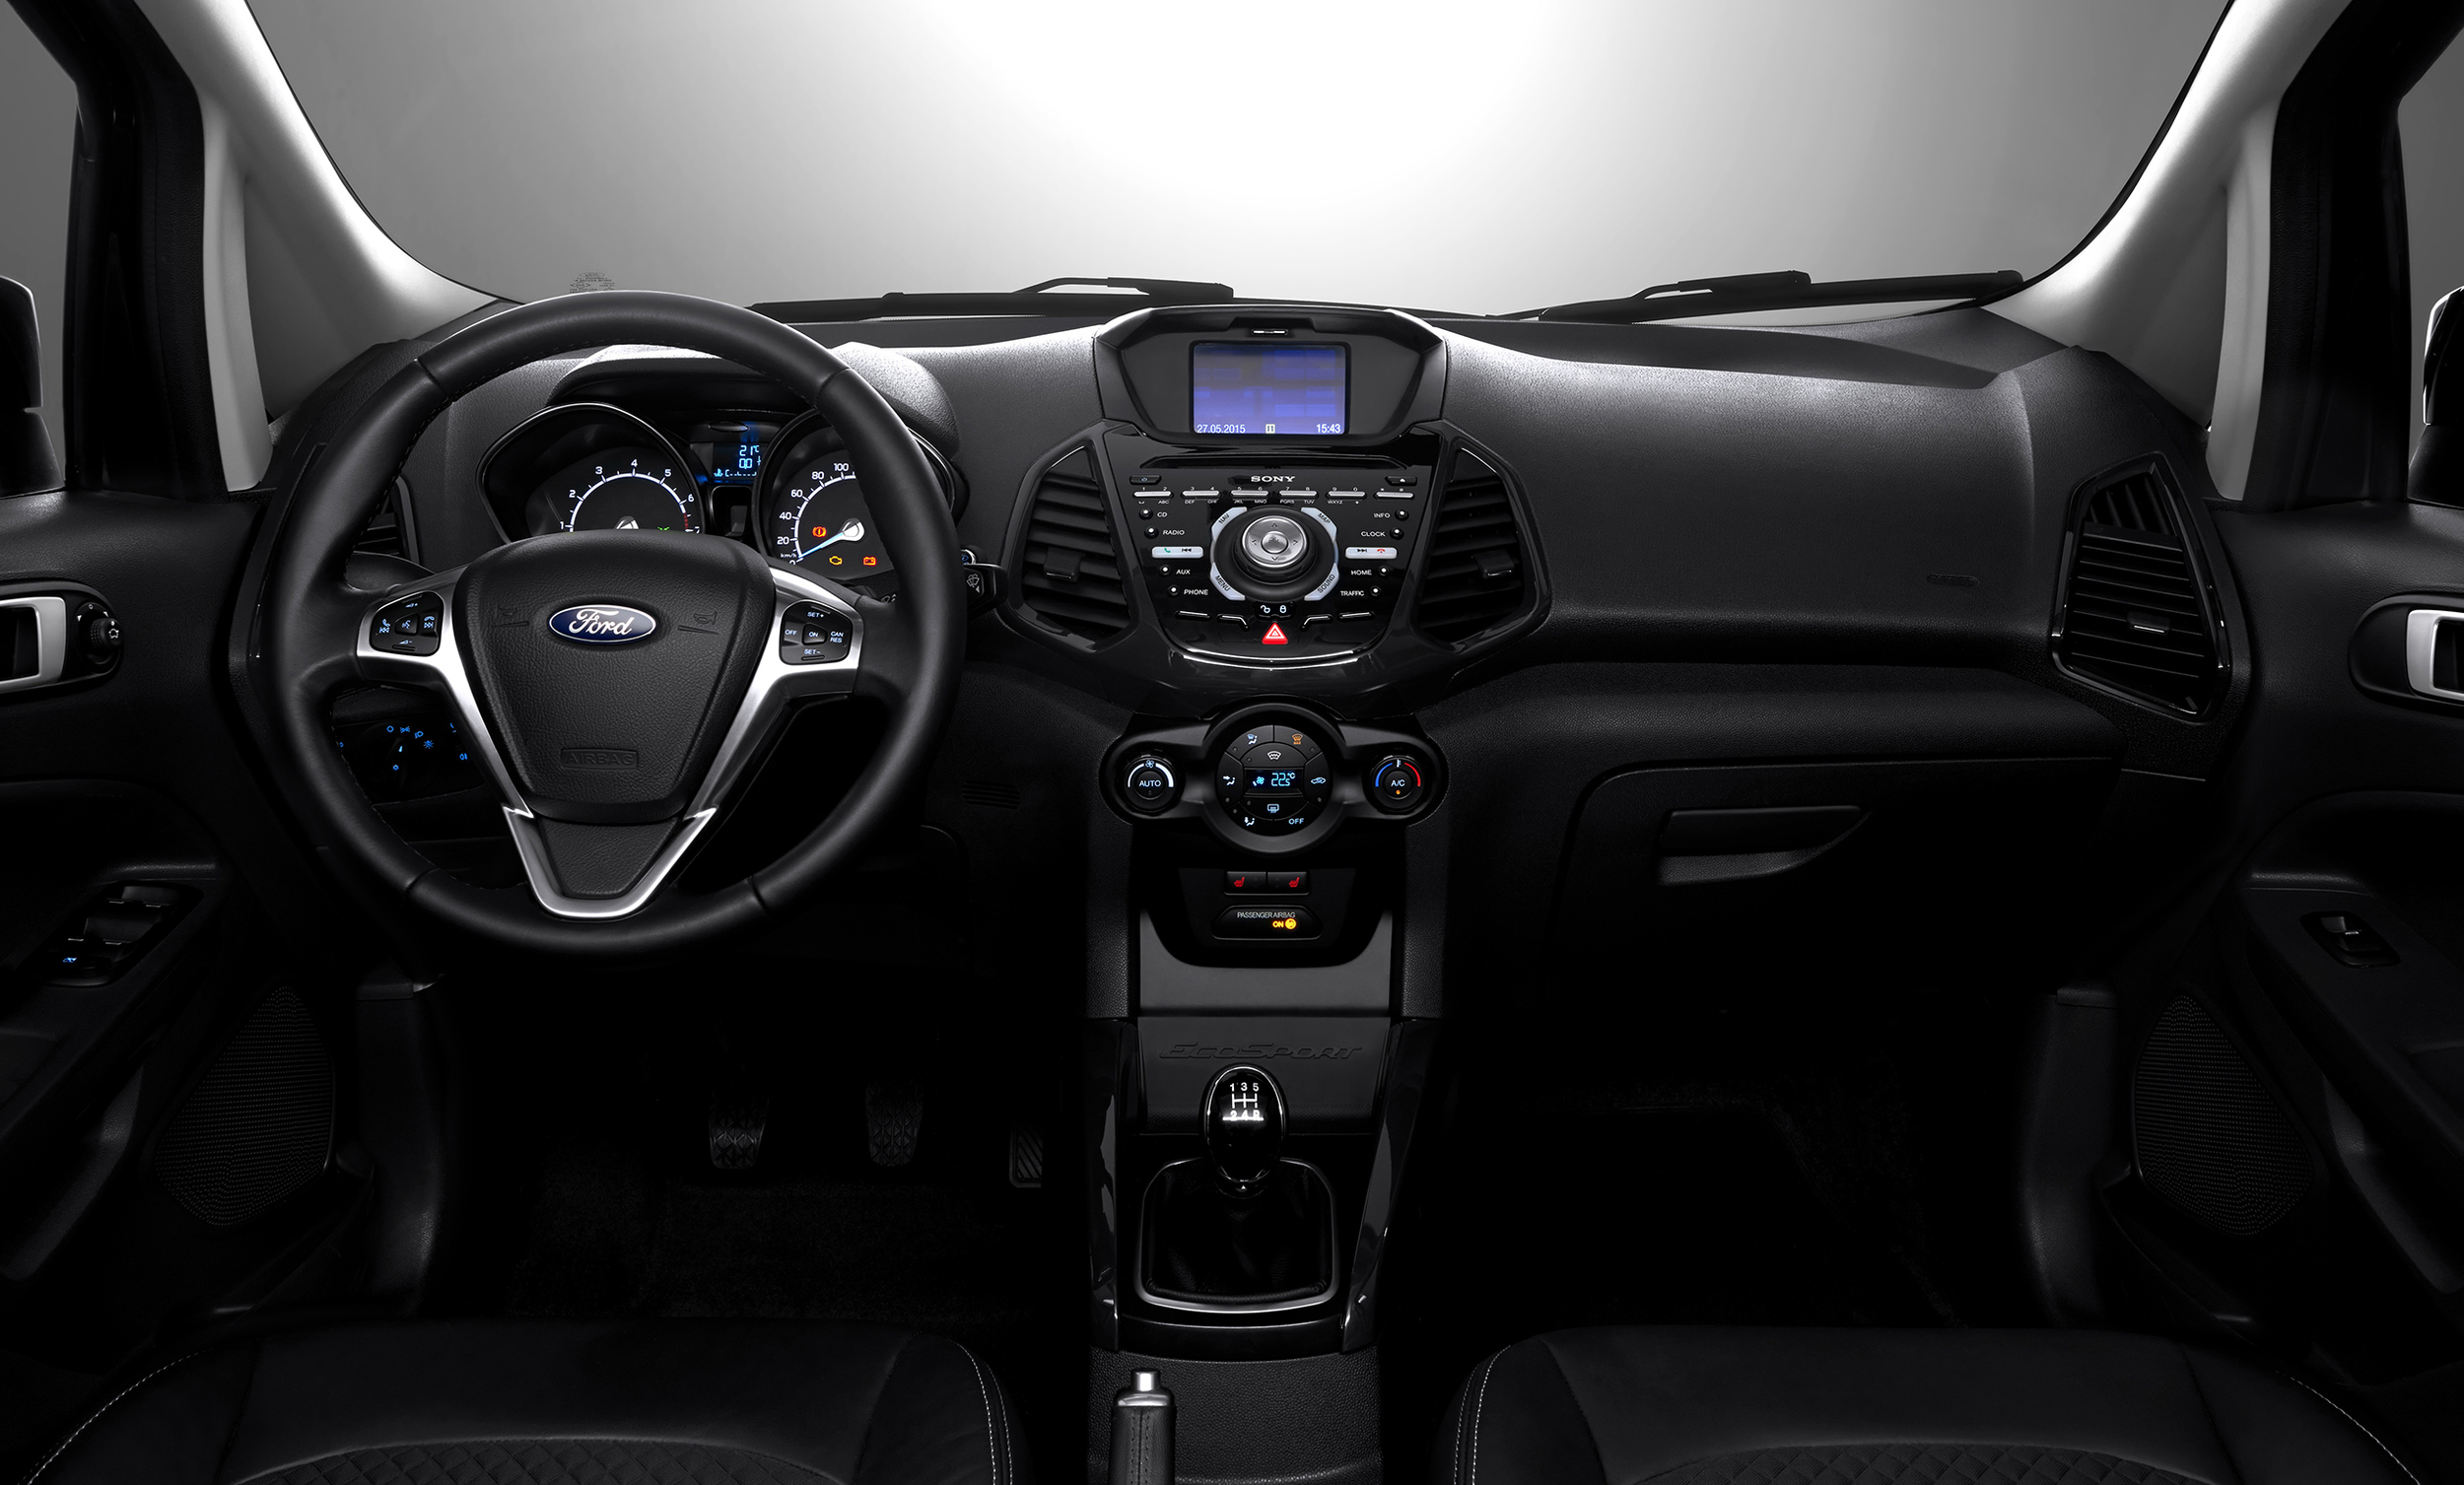 Ford EcoSport gets new upgrades